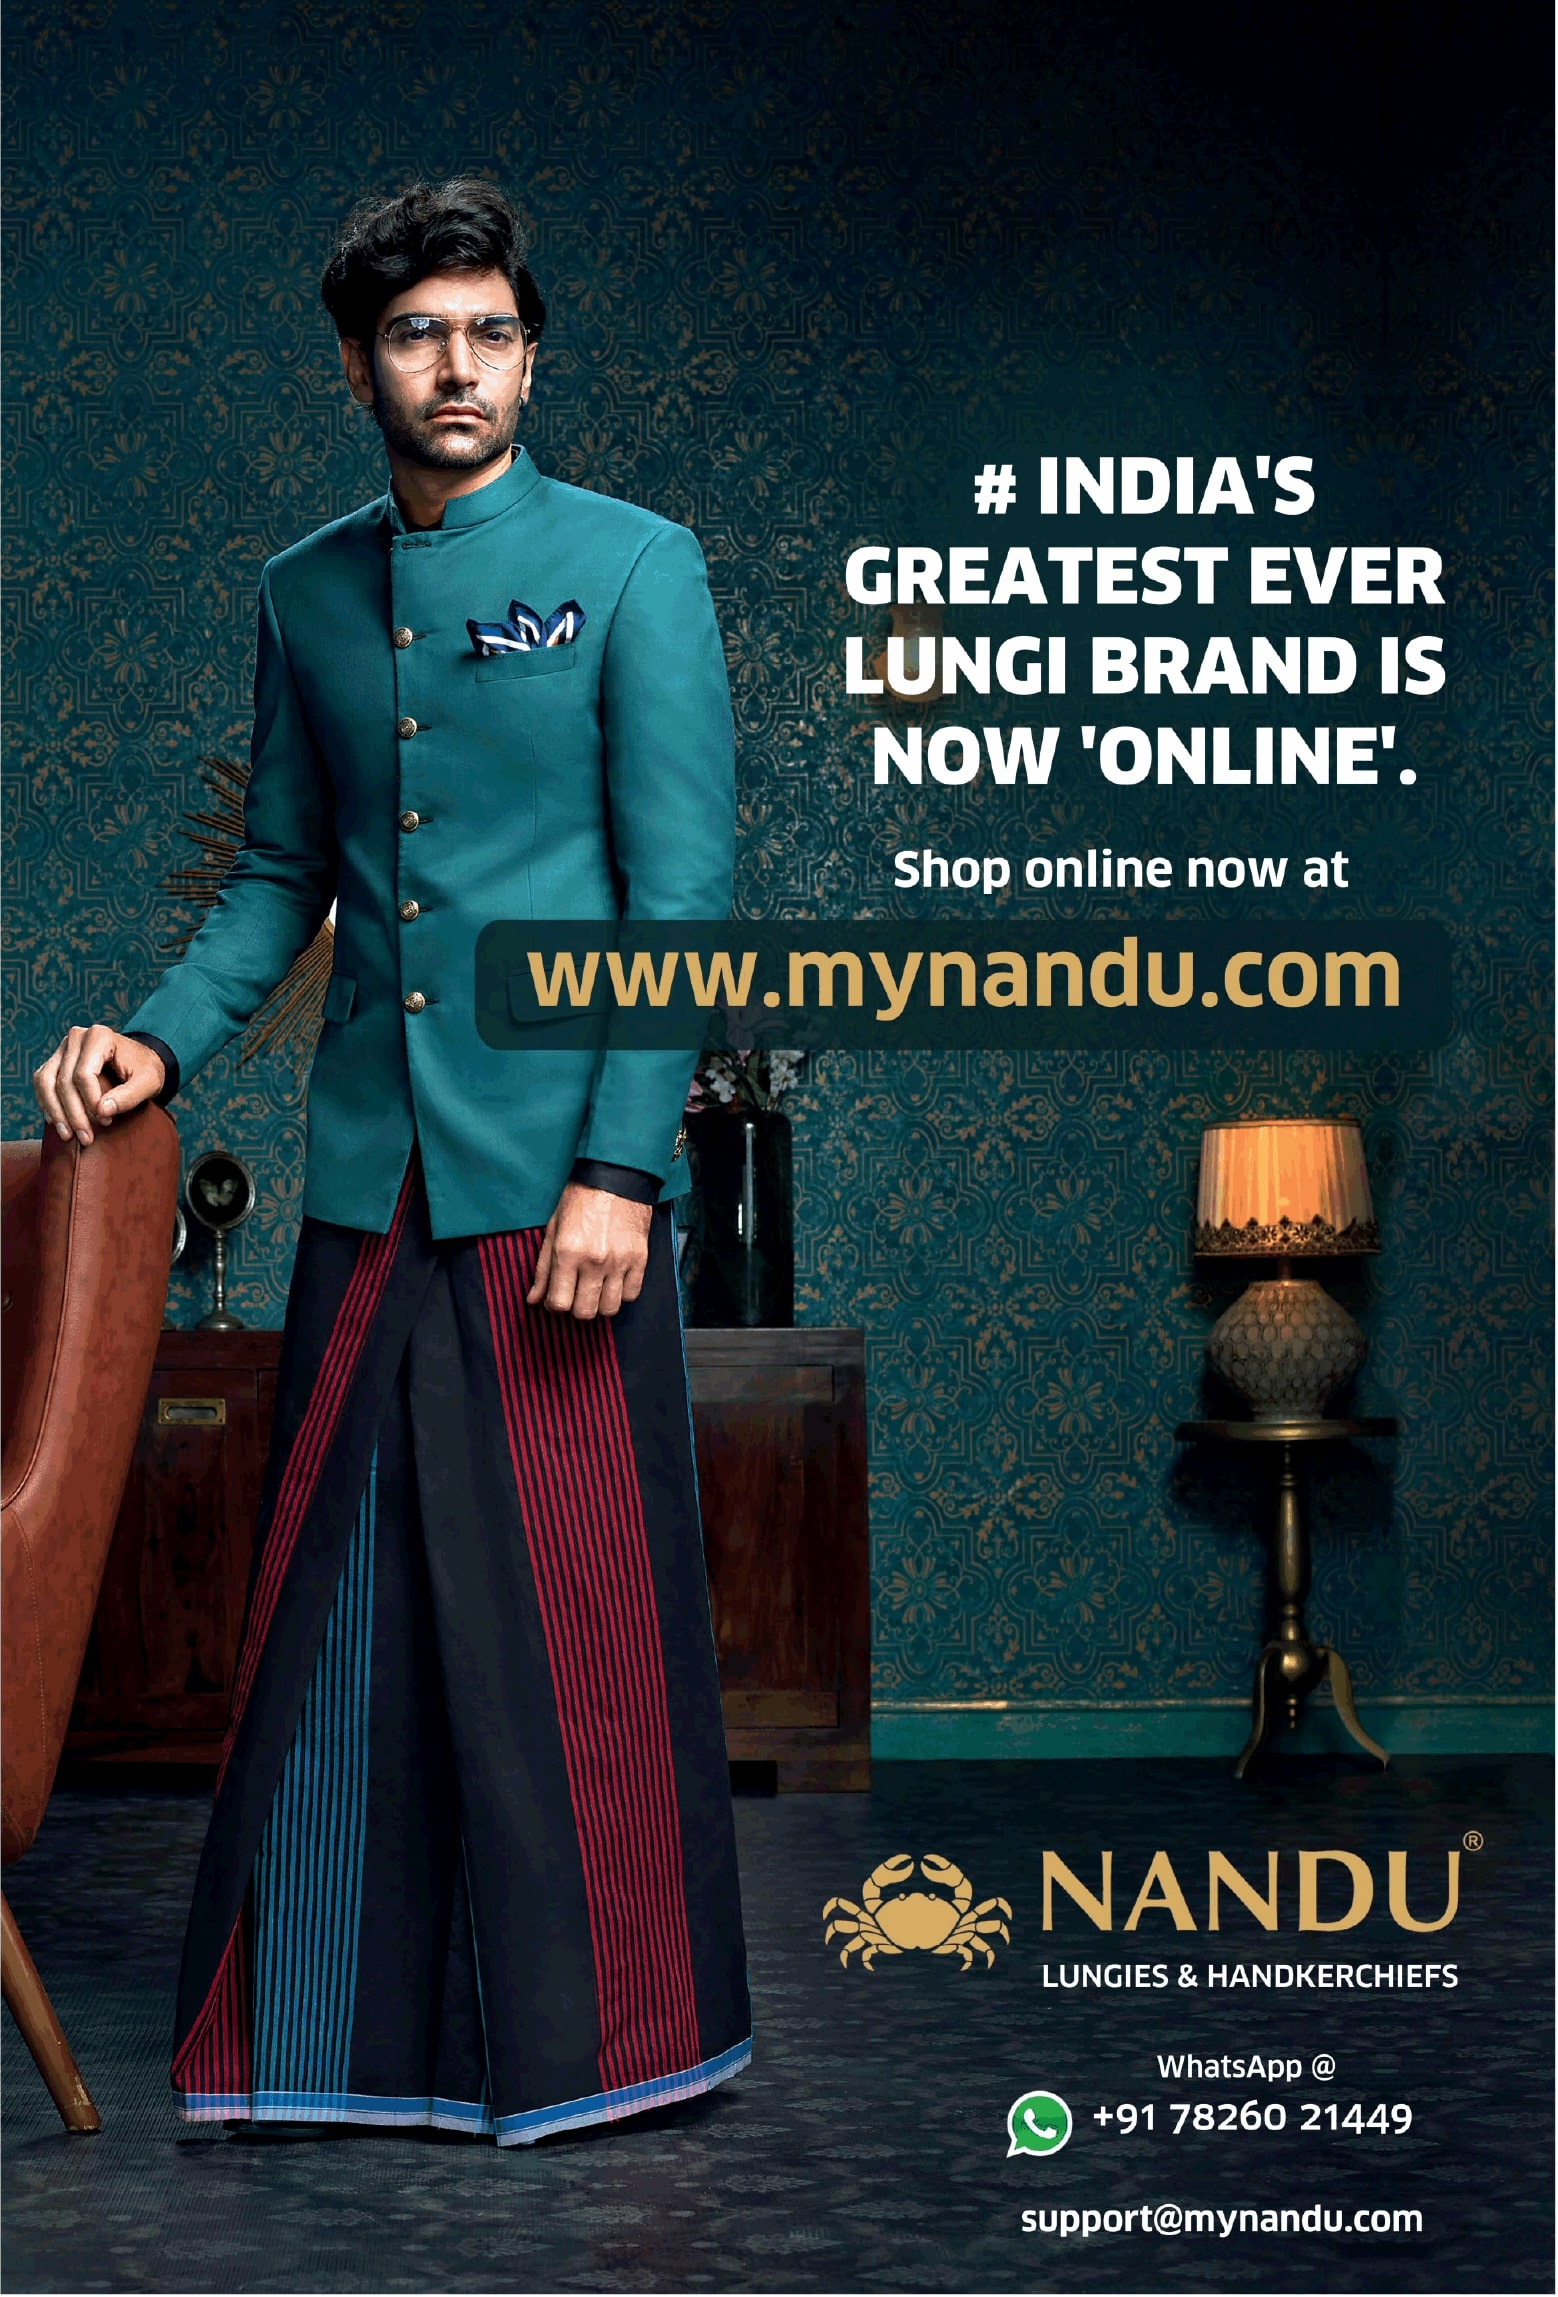 nandu-lungies-and-handkerchefs-indias-greatest-ever-lungi-brand-is-now-online-ad-times-of-india-chennai-01-01-2021